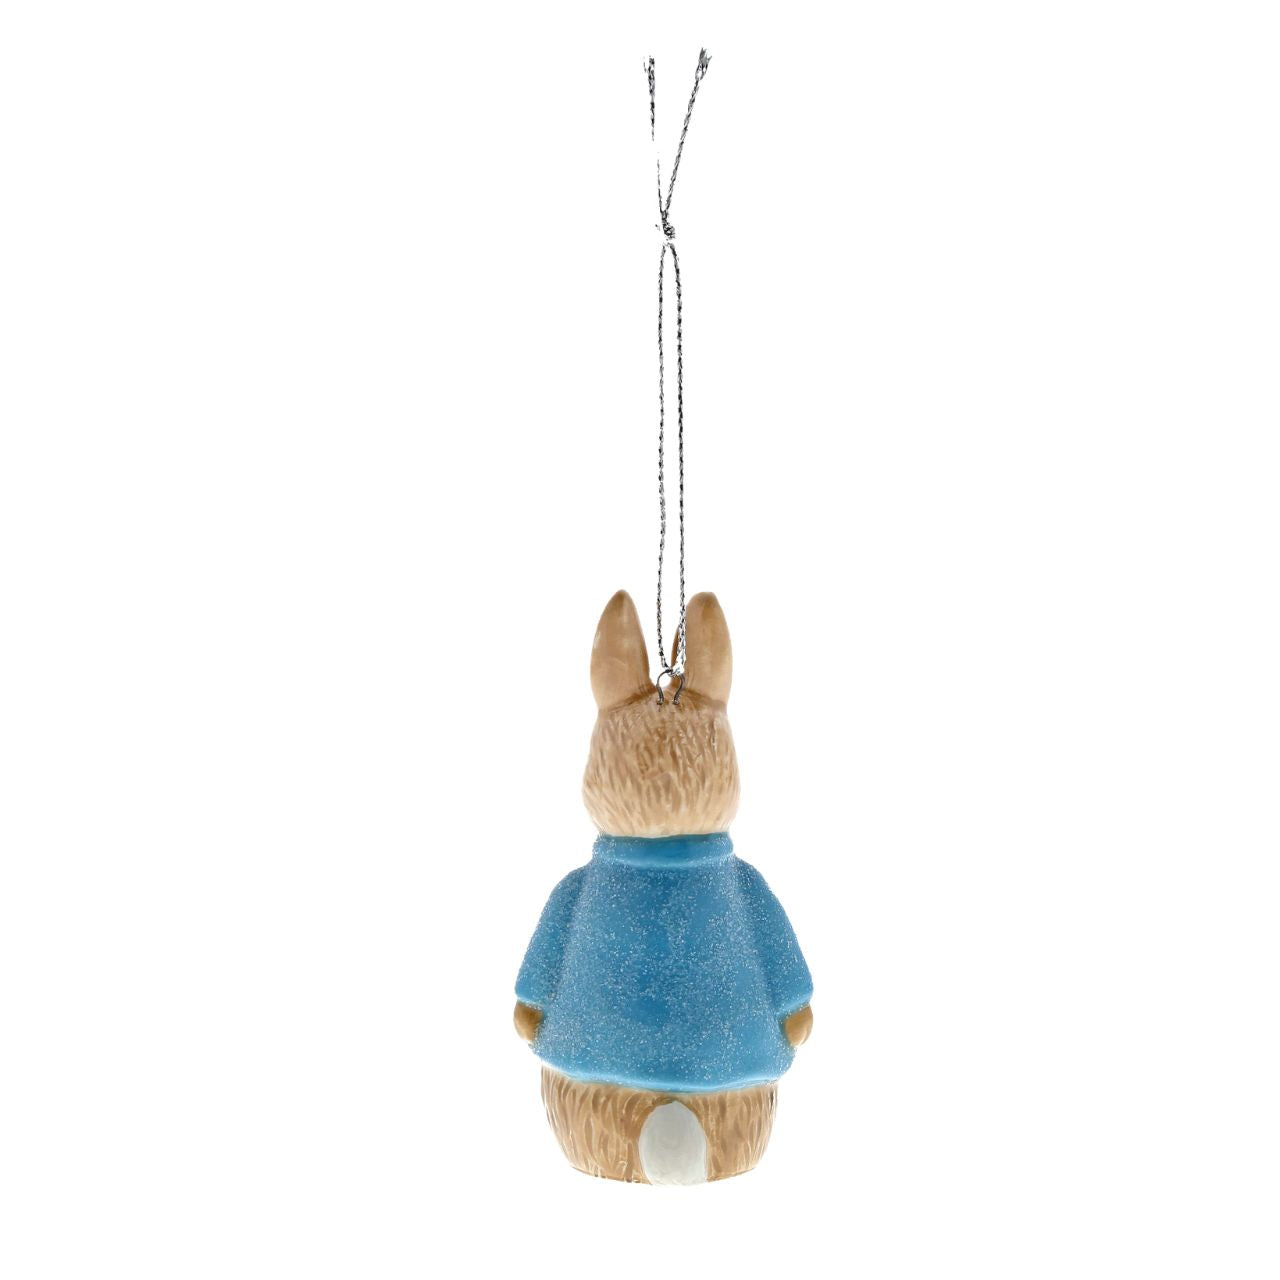 Beatrix Potter Peter Rabbit Sculpted Christmas Hanging Decoration  A beautiful Peter Rabbit Sculpted Hanging Ornament made from fine ceramic and finished with a blue glittering jacket. This Peter Rabbit hanging ornament will make a wonderful finishing touch for all manners of celebrations such as parties or home decorations.